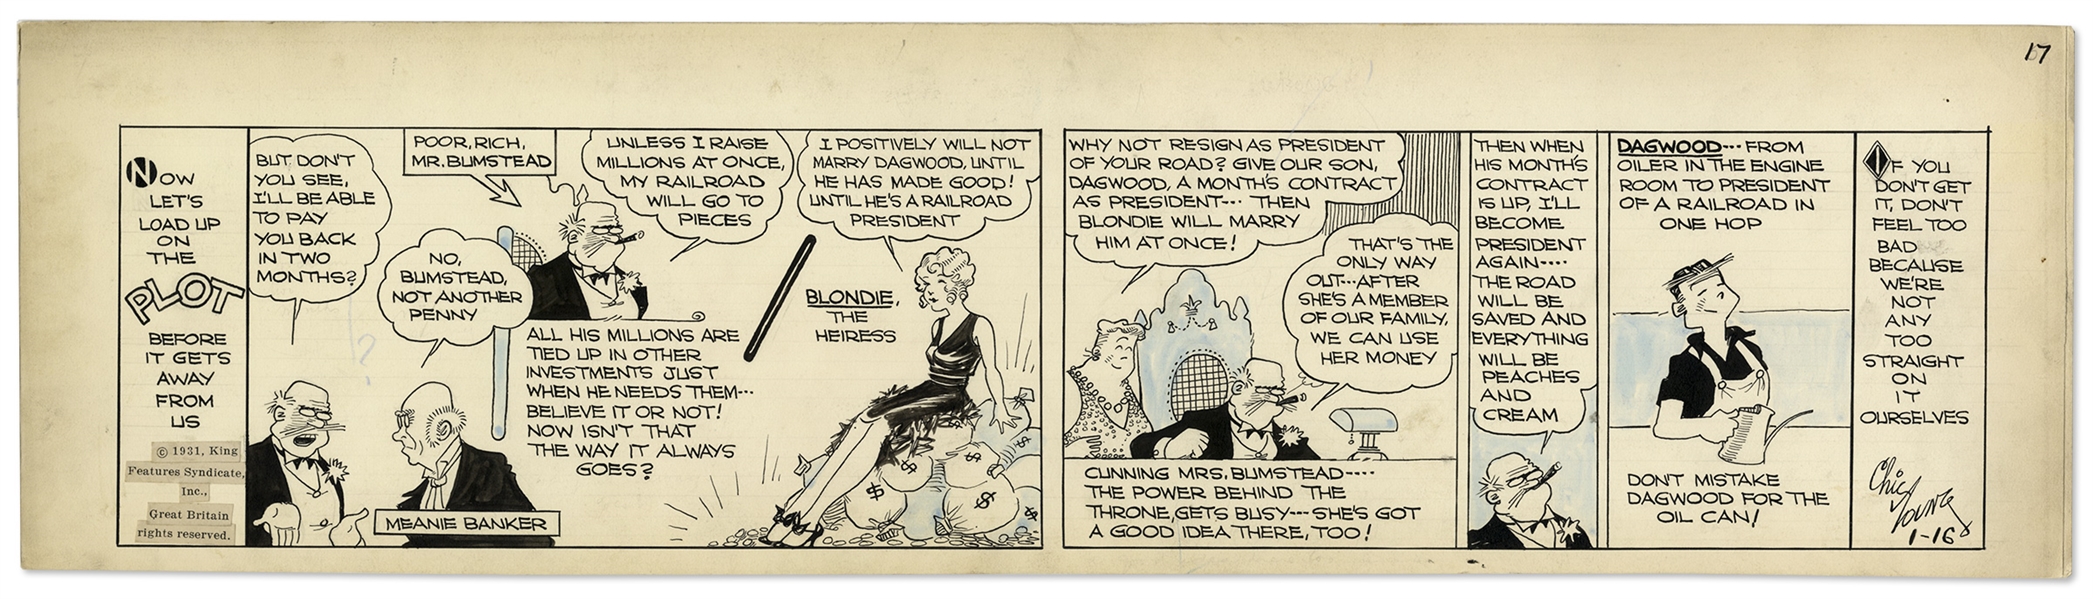 Chic Young Hand-Drawn ''Blondie'' Comic Strip From January 1931 Titled ''Get This Straight'' -- One of the Earliest Blondie Strips With a Recap of the Plot Thus Far